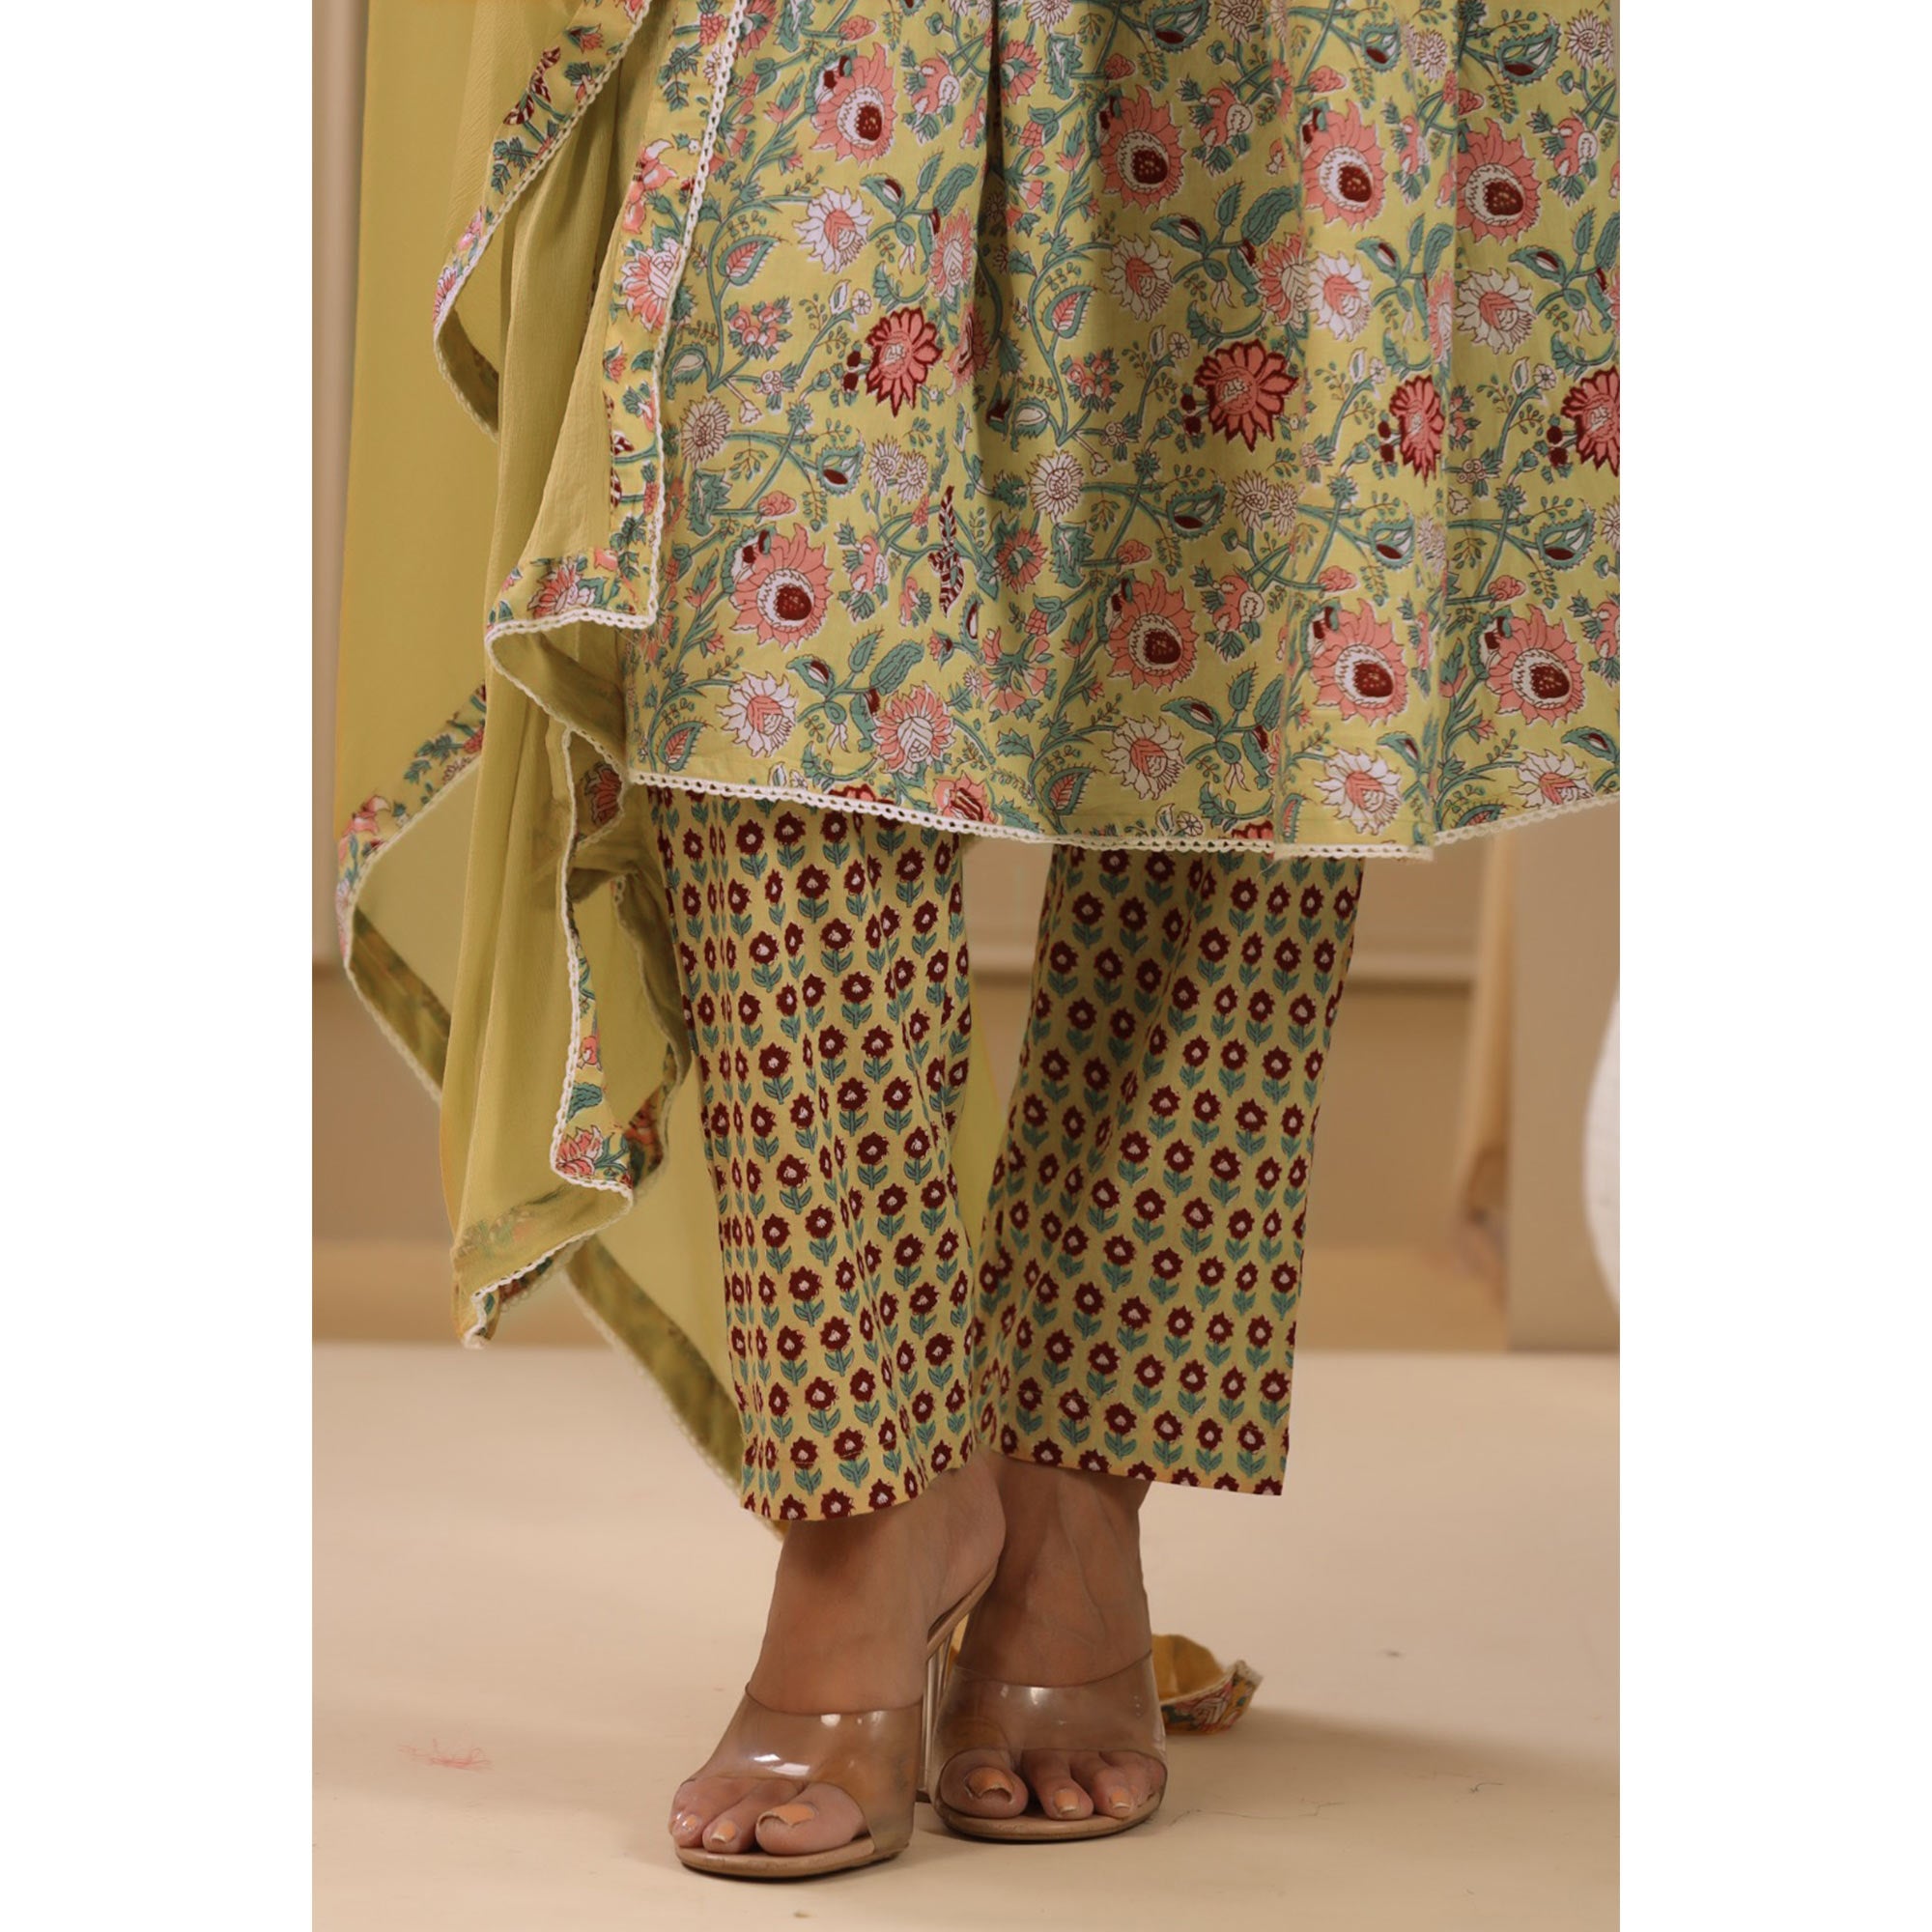 Mustard Floral Printed Pure Cotton Naira Cut Suit